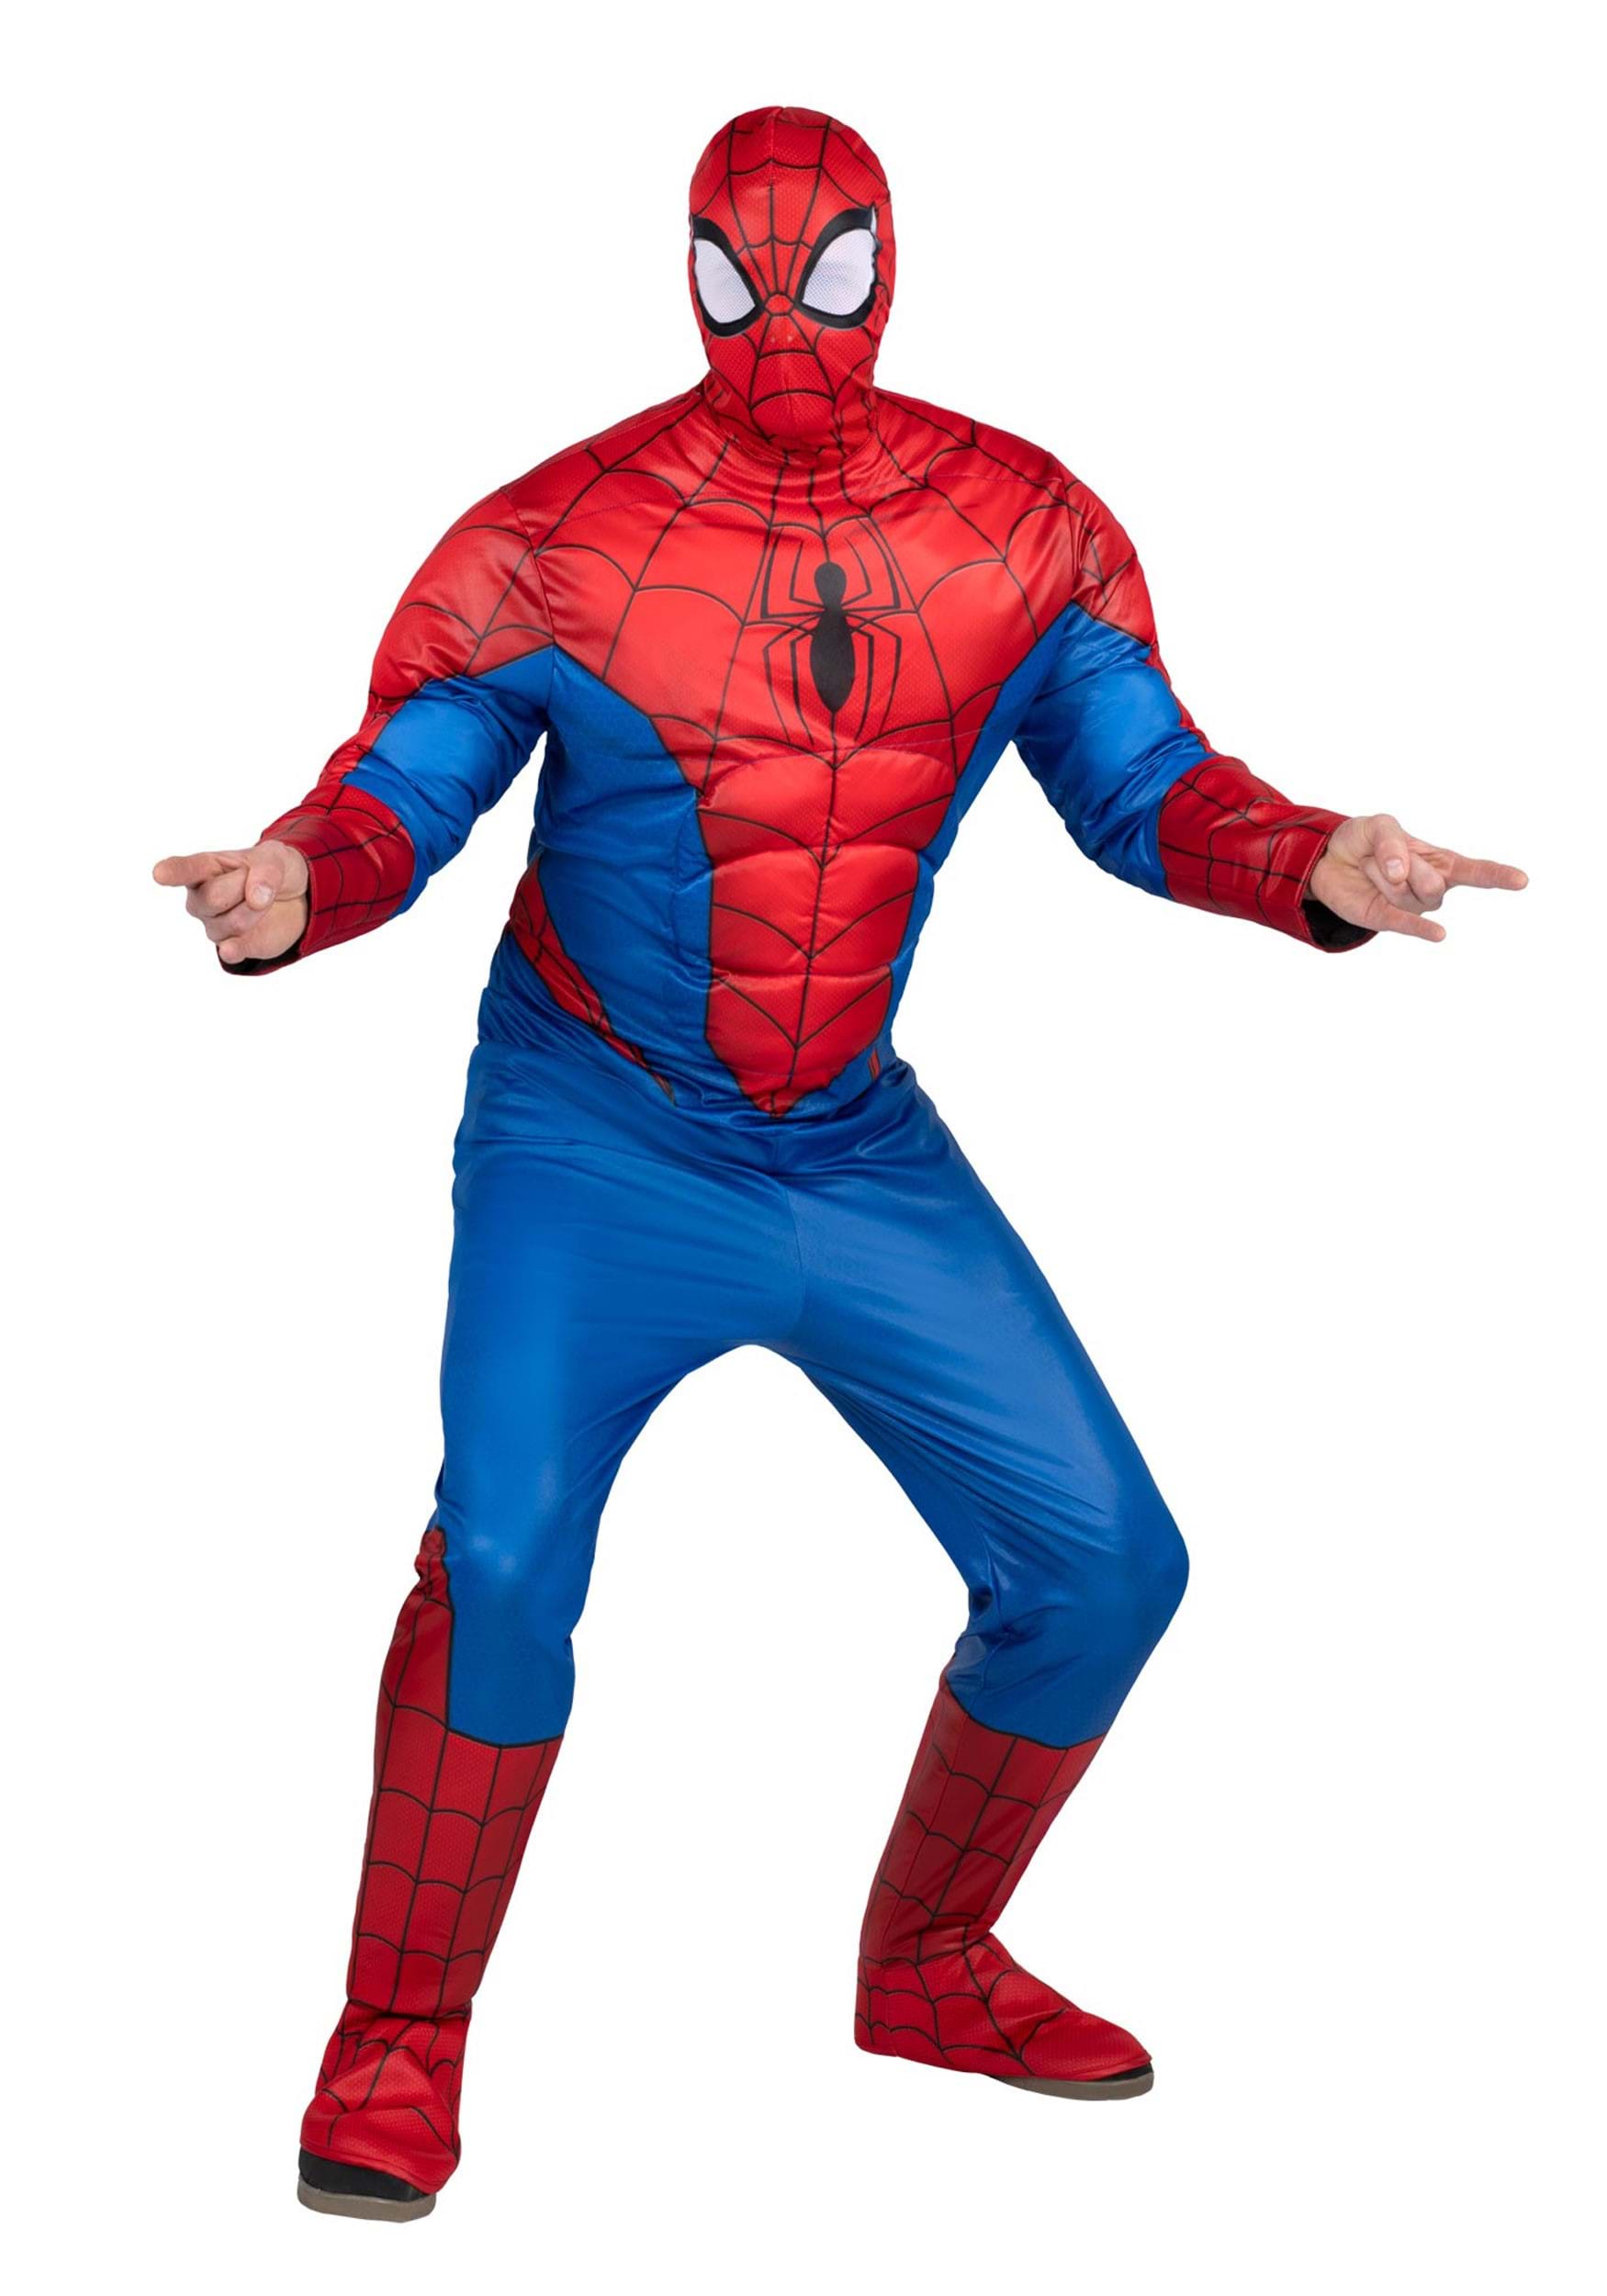 Spider-Man Costume for Adults